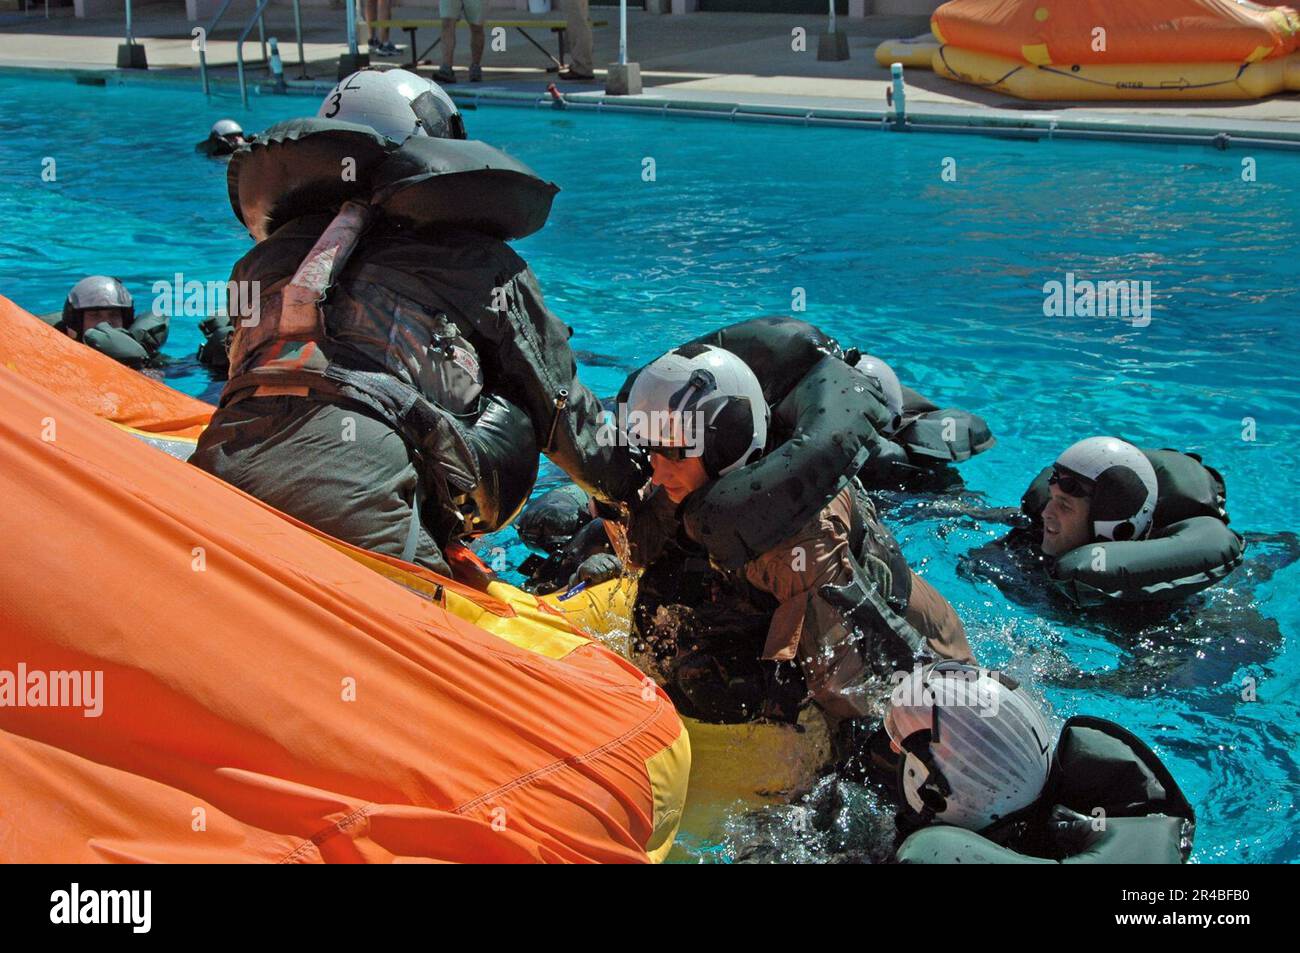 US Navy  Navy air crewman help each other into a 12-man life raft to await a simulated rescue in the pool at Aviation Survival Training Center (ASTC) Miramar. Stock Photo